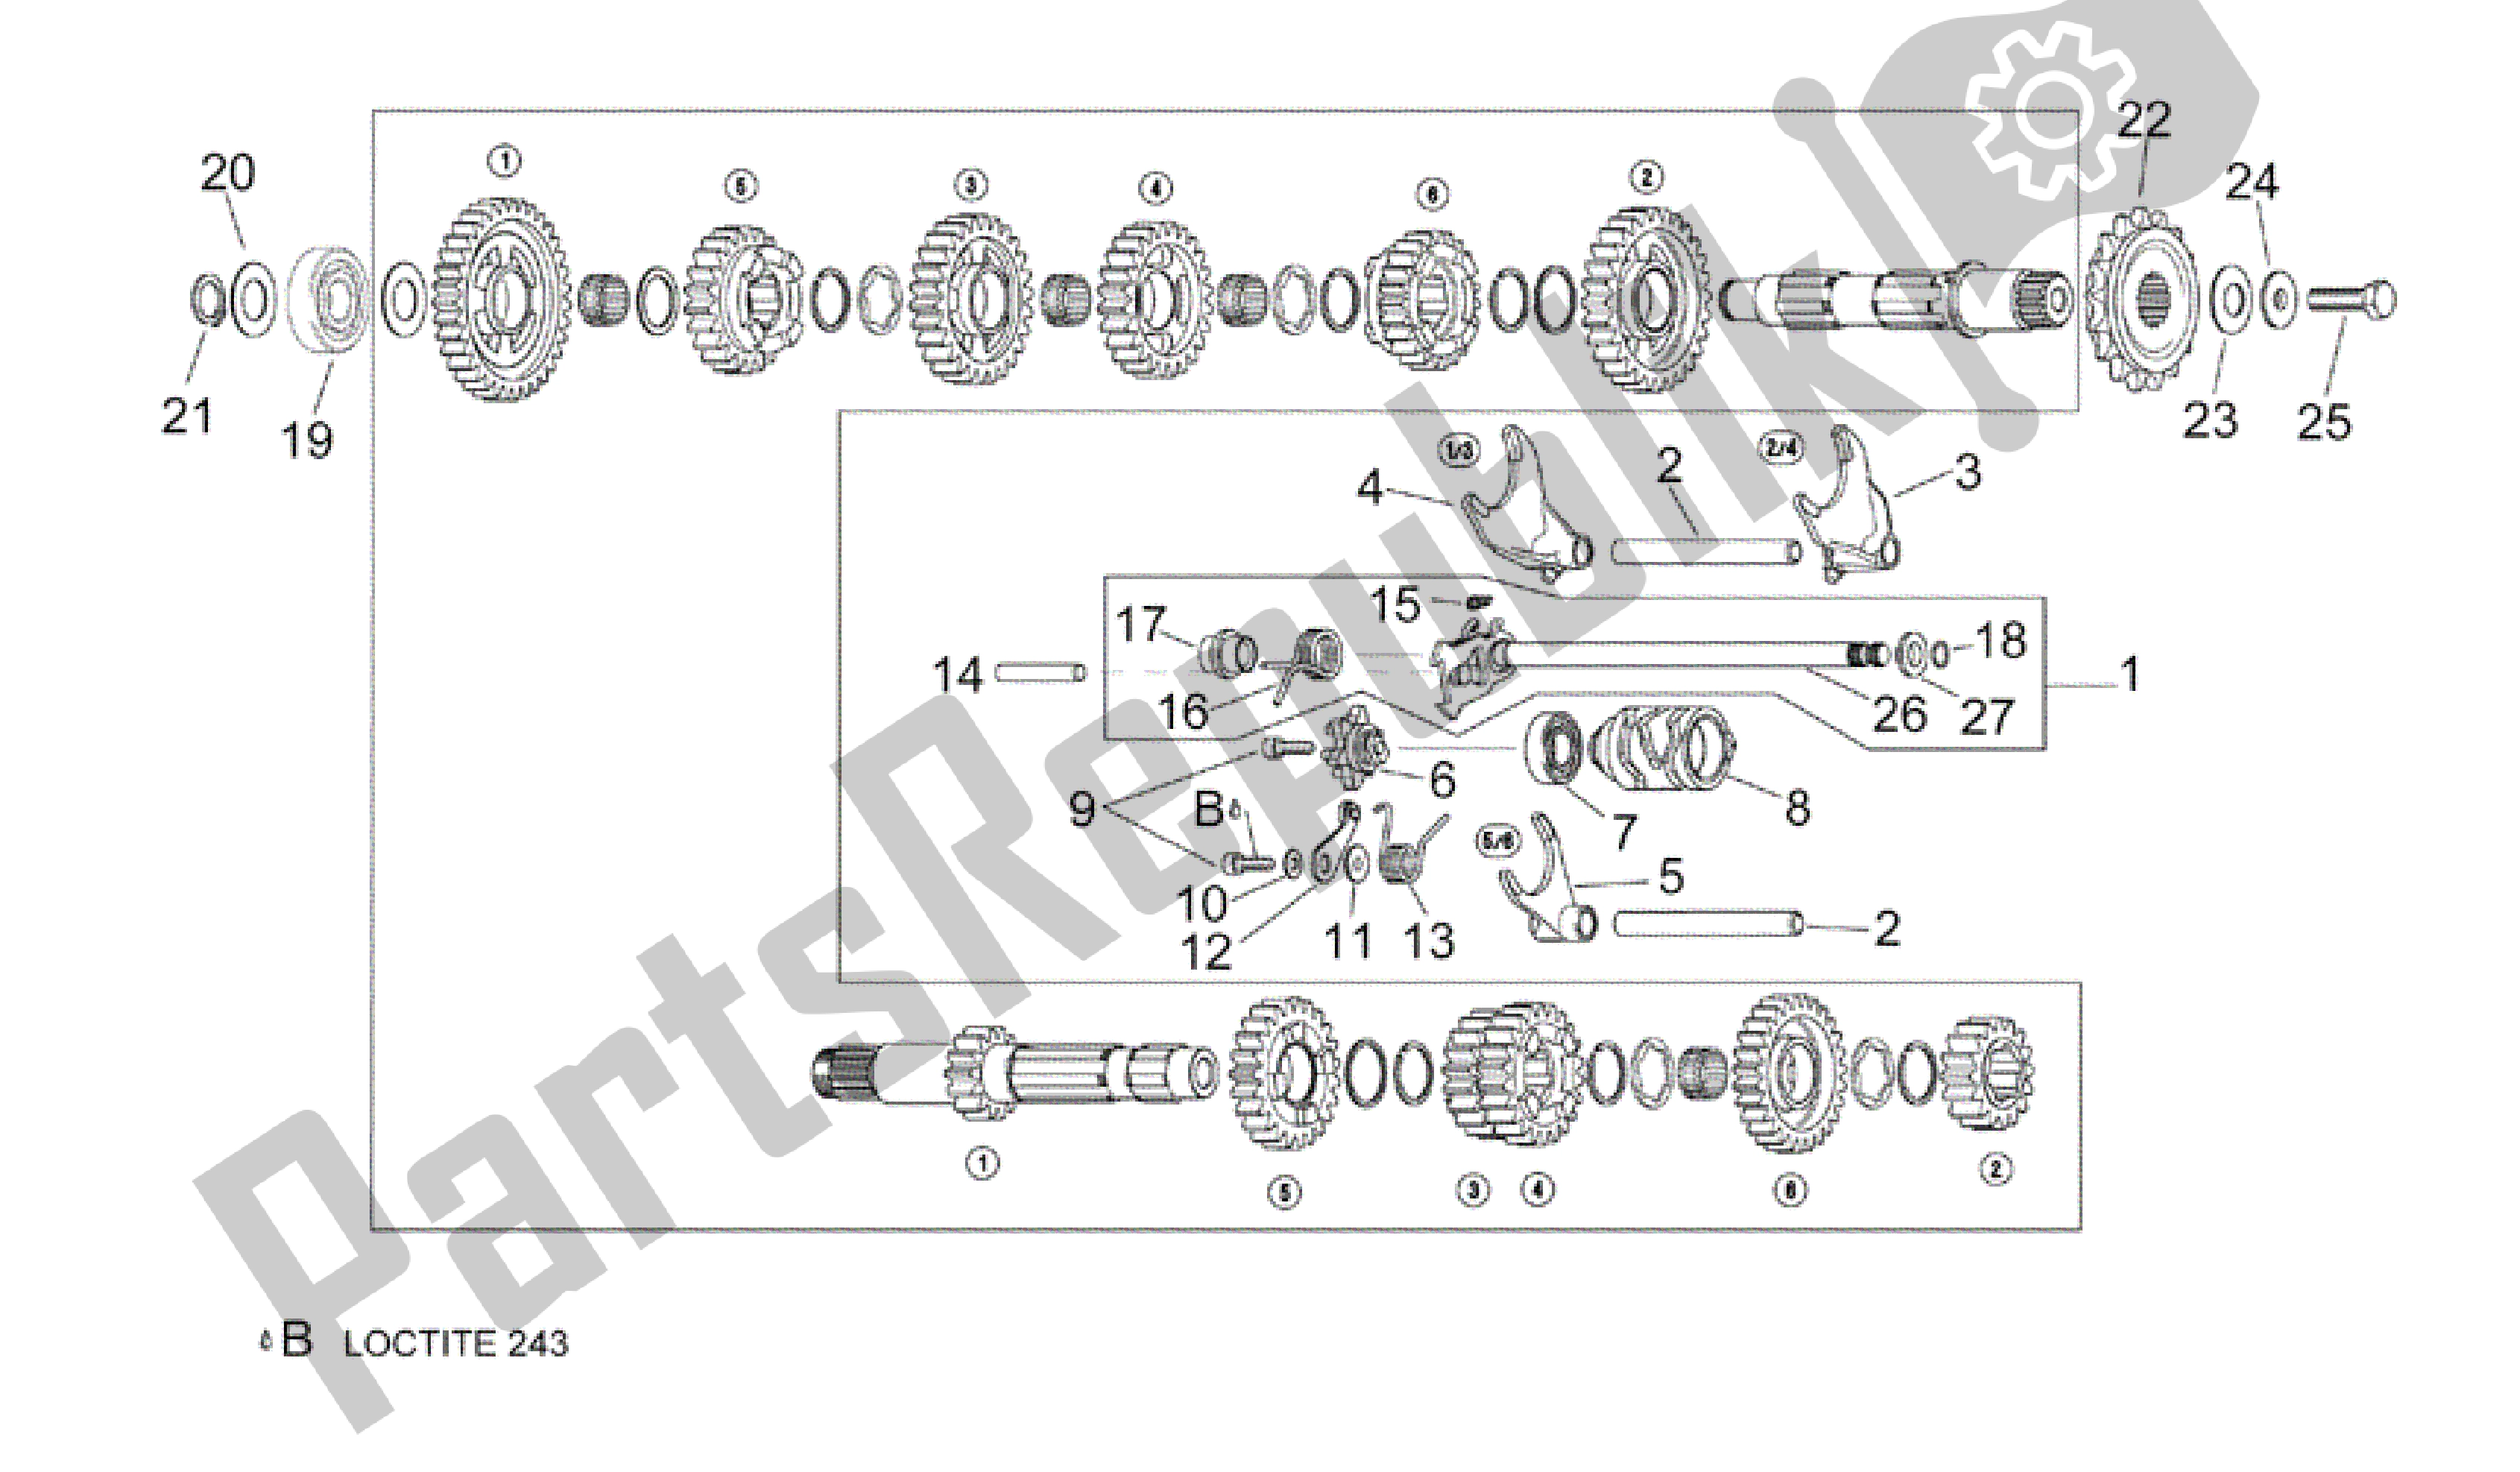 All parts for the Gear Box Selector of the Aprilia RSV Mille R GP1 Limited Edition 3963 1000 2003